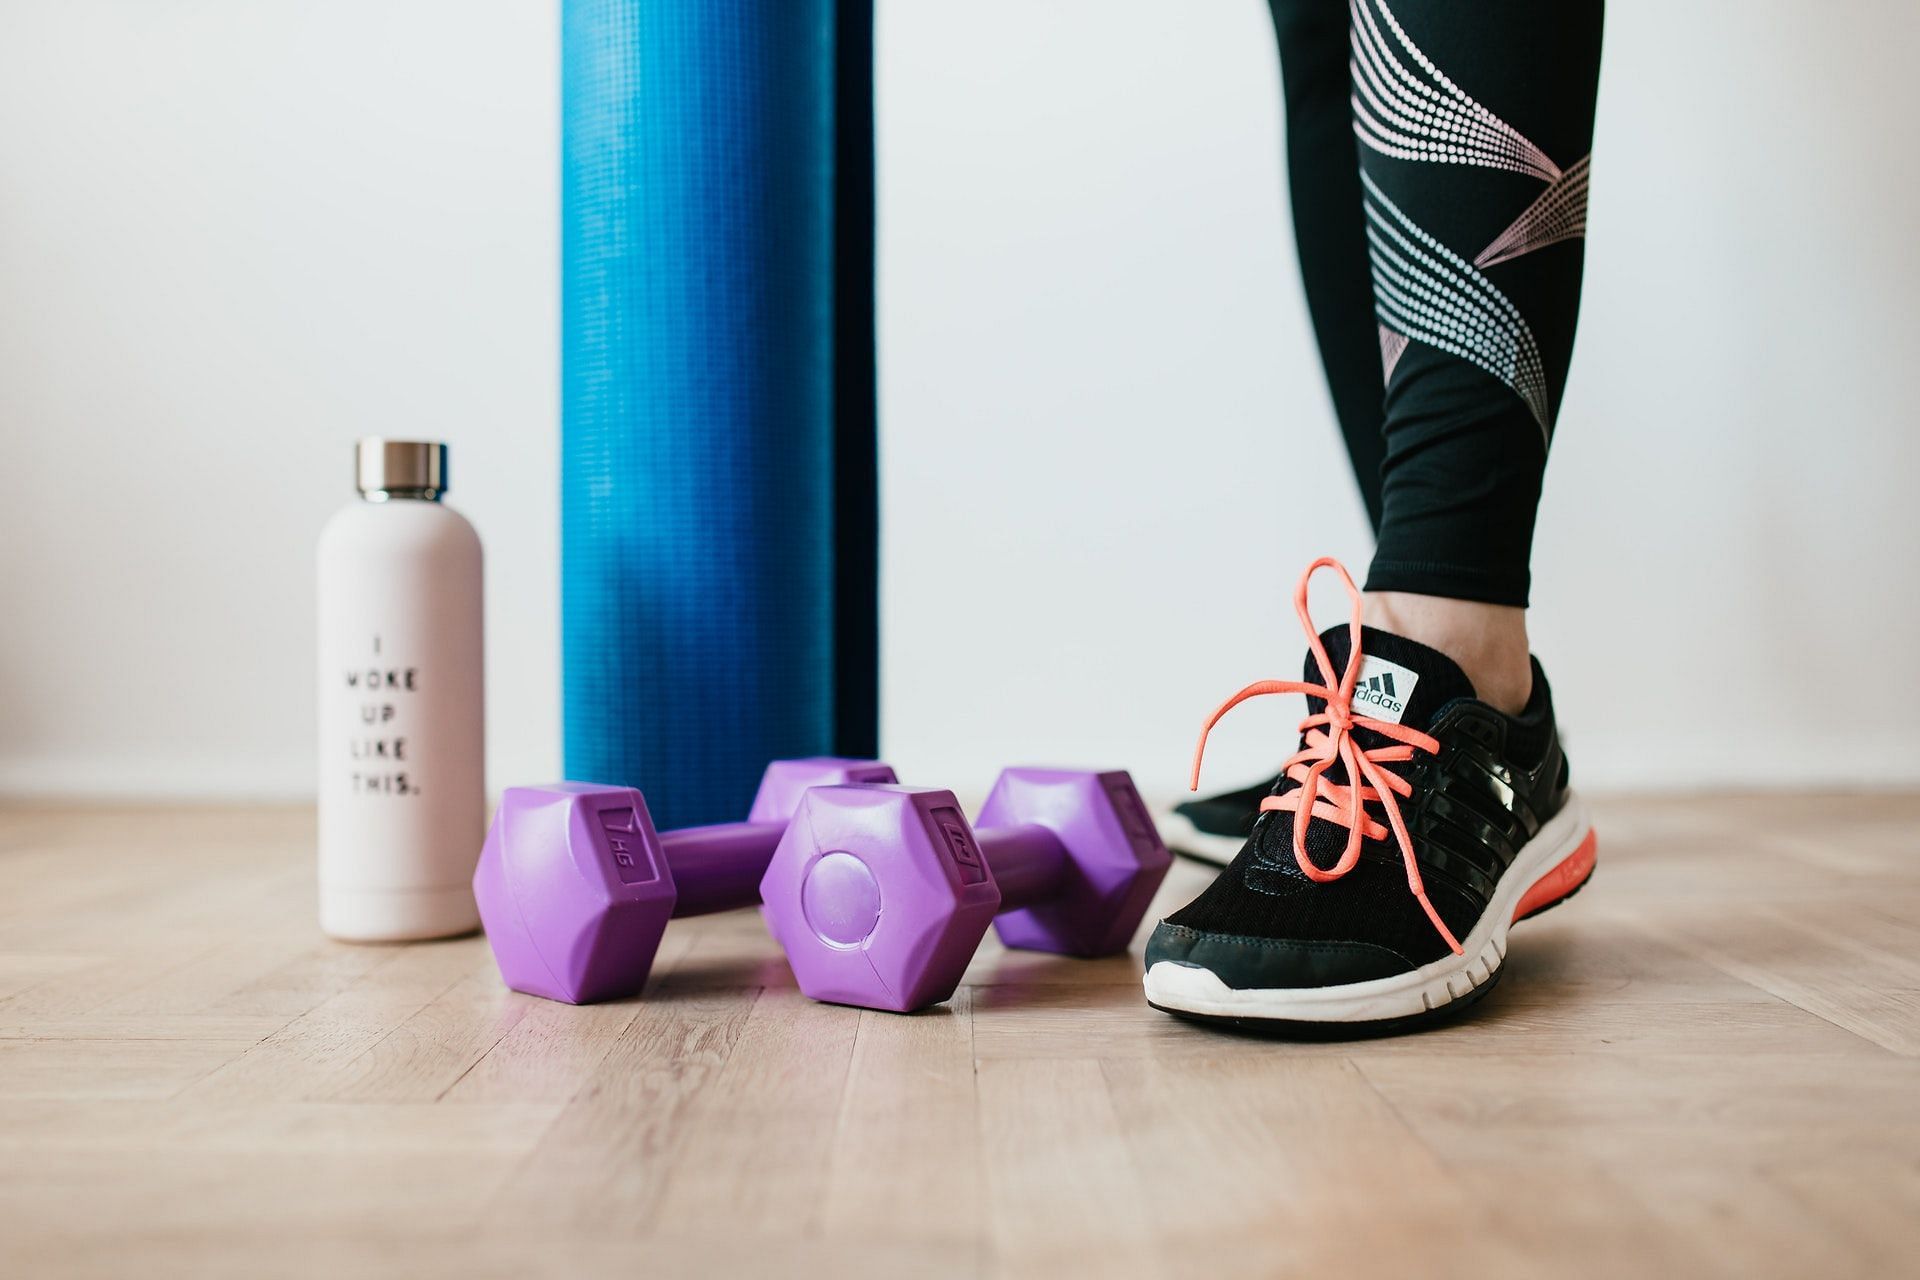 Hamstring exercises helps to keep the legs and lower body strong. (Photo by Karolina Grabowska via pexels)